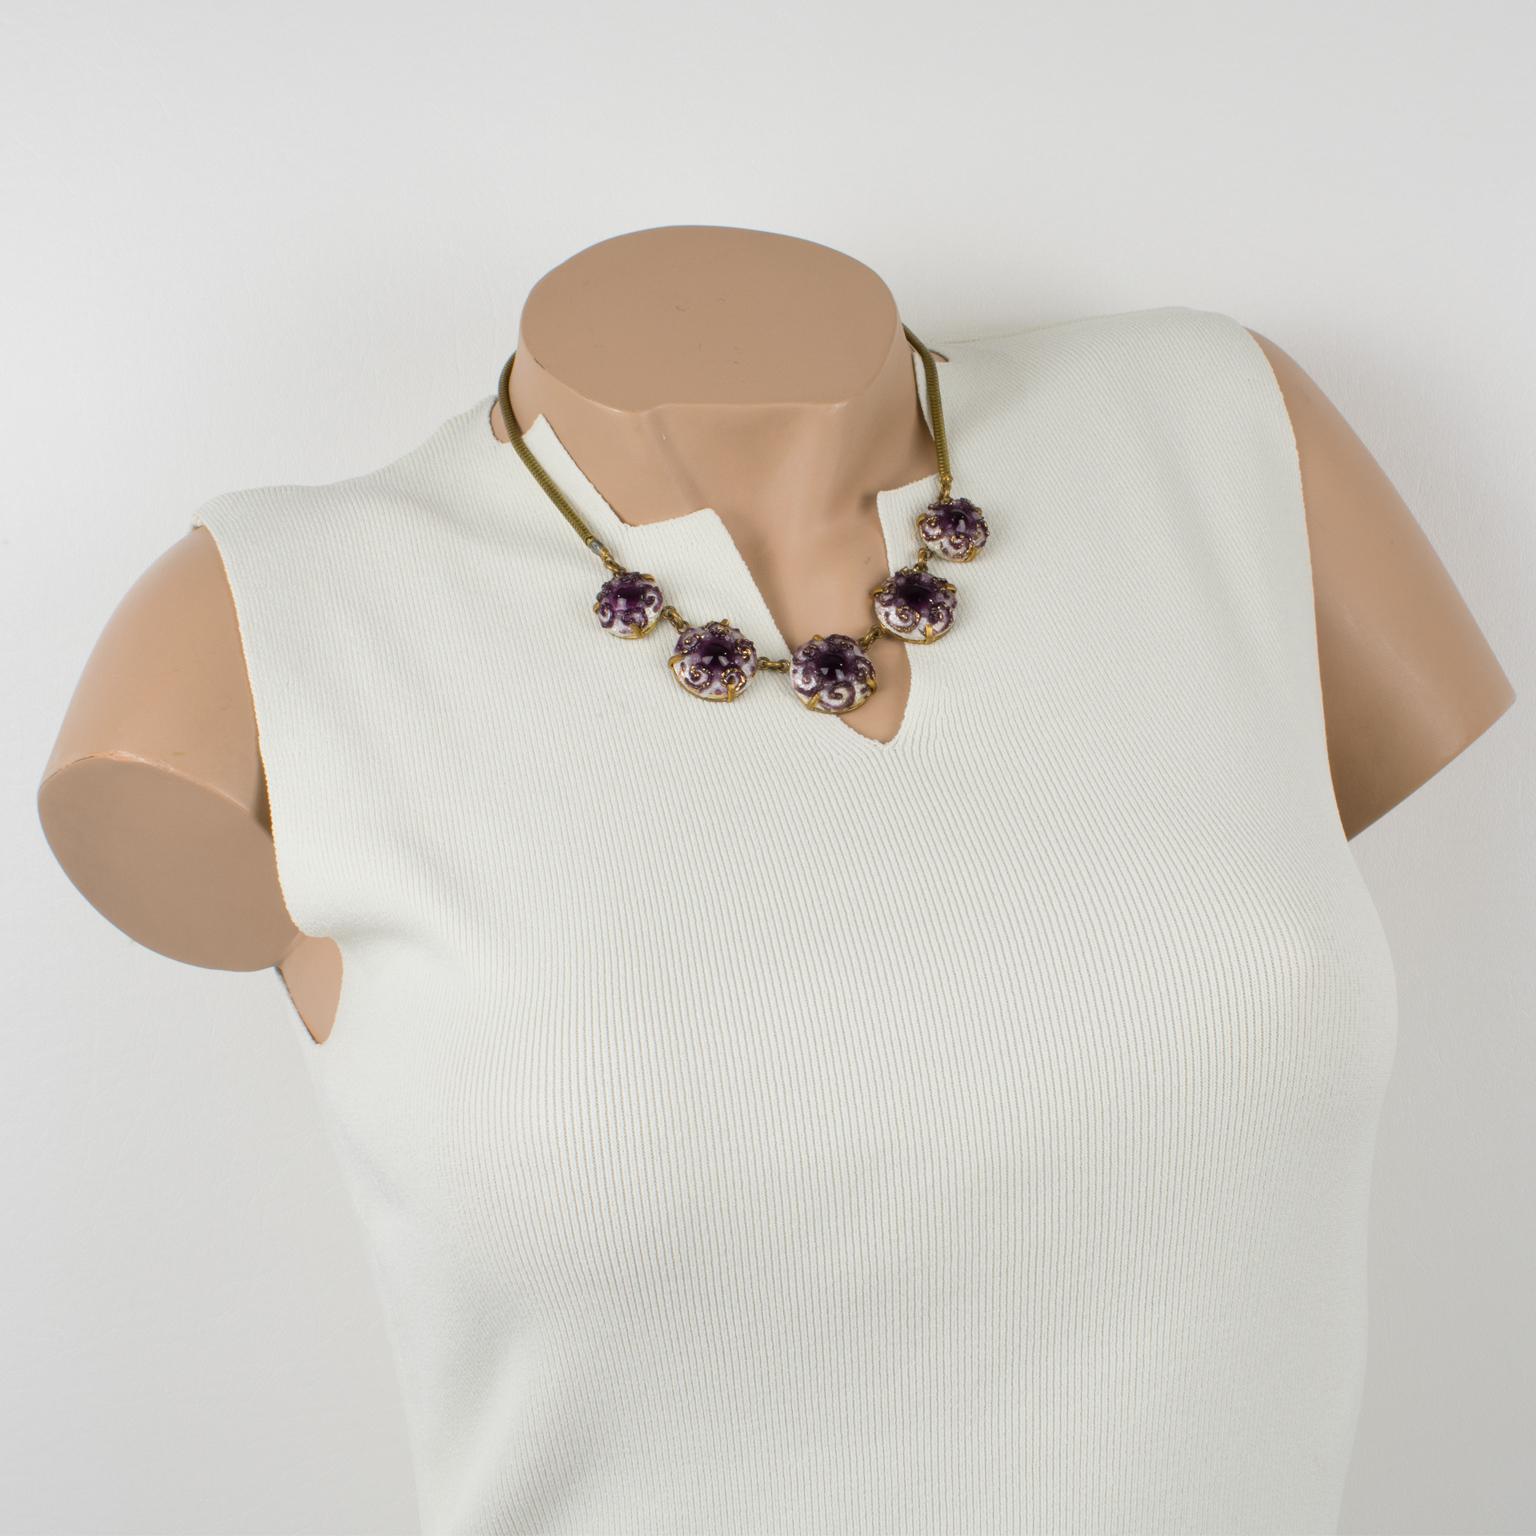 This beautiful enamel and pate de verre link choker necklace was handcrafted by Lazerat Limoges, France, in the 1950s. The enameled round domed copper elements are in graduated shapes and hinged together with a serpentine chain in brass. This